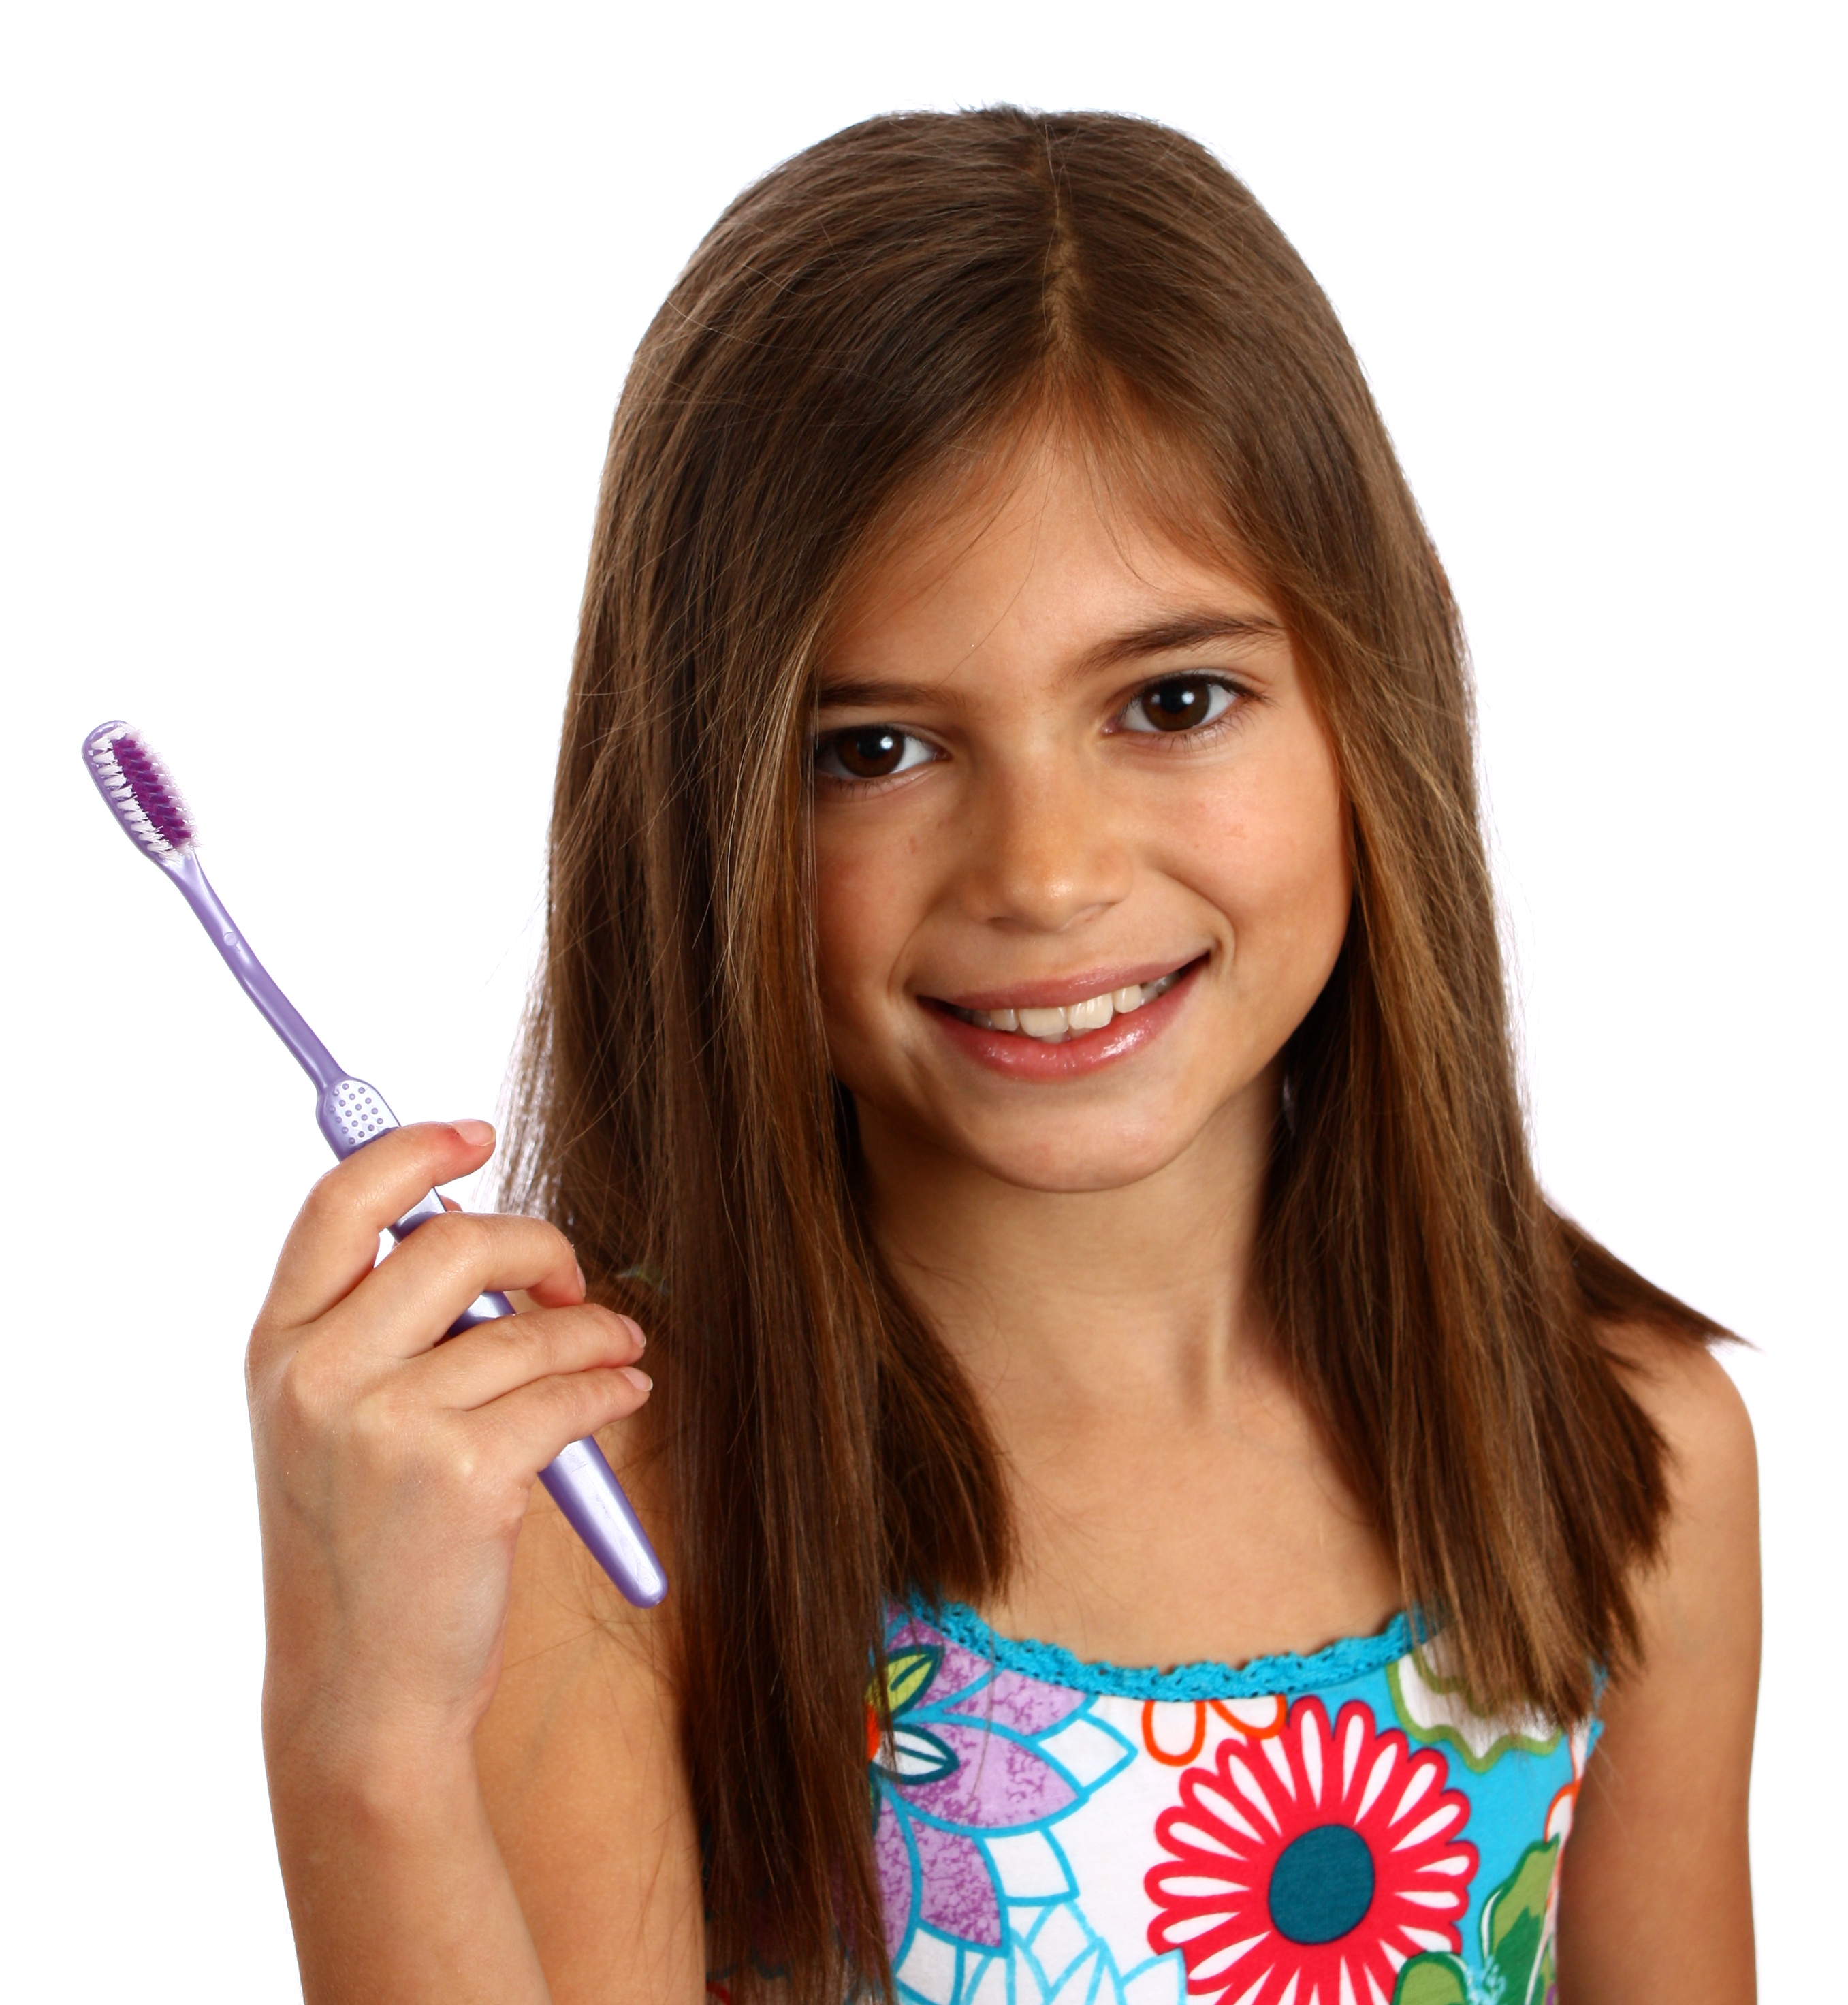 A pretty young girl holding a toothbrush photo